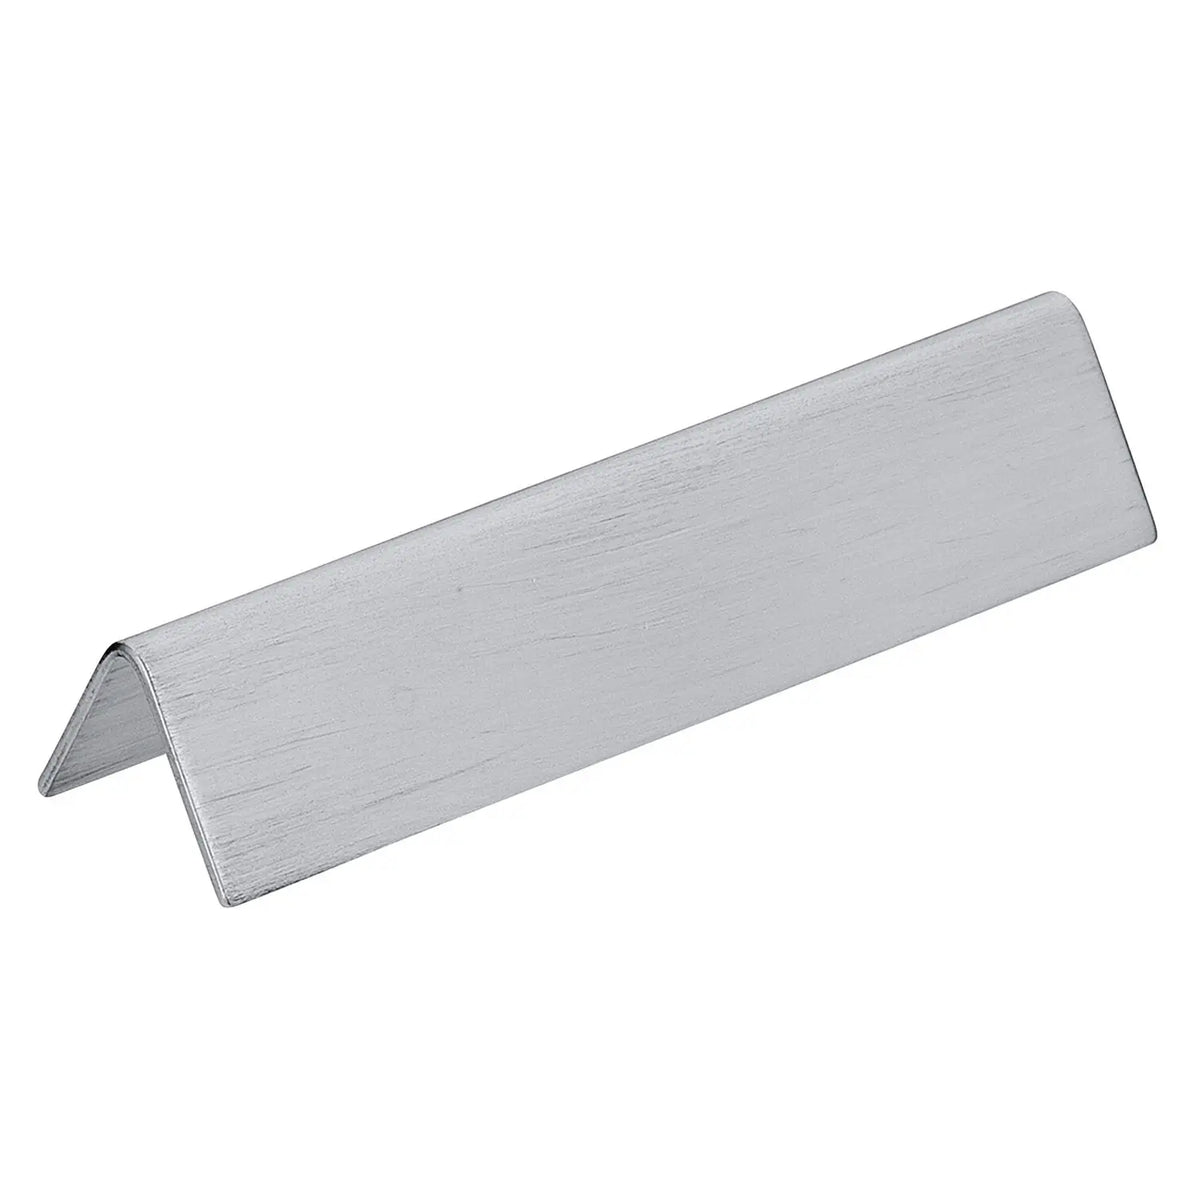 Todai Stainless Steel Cutlery Rest Economy